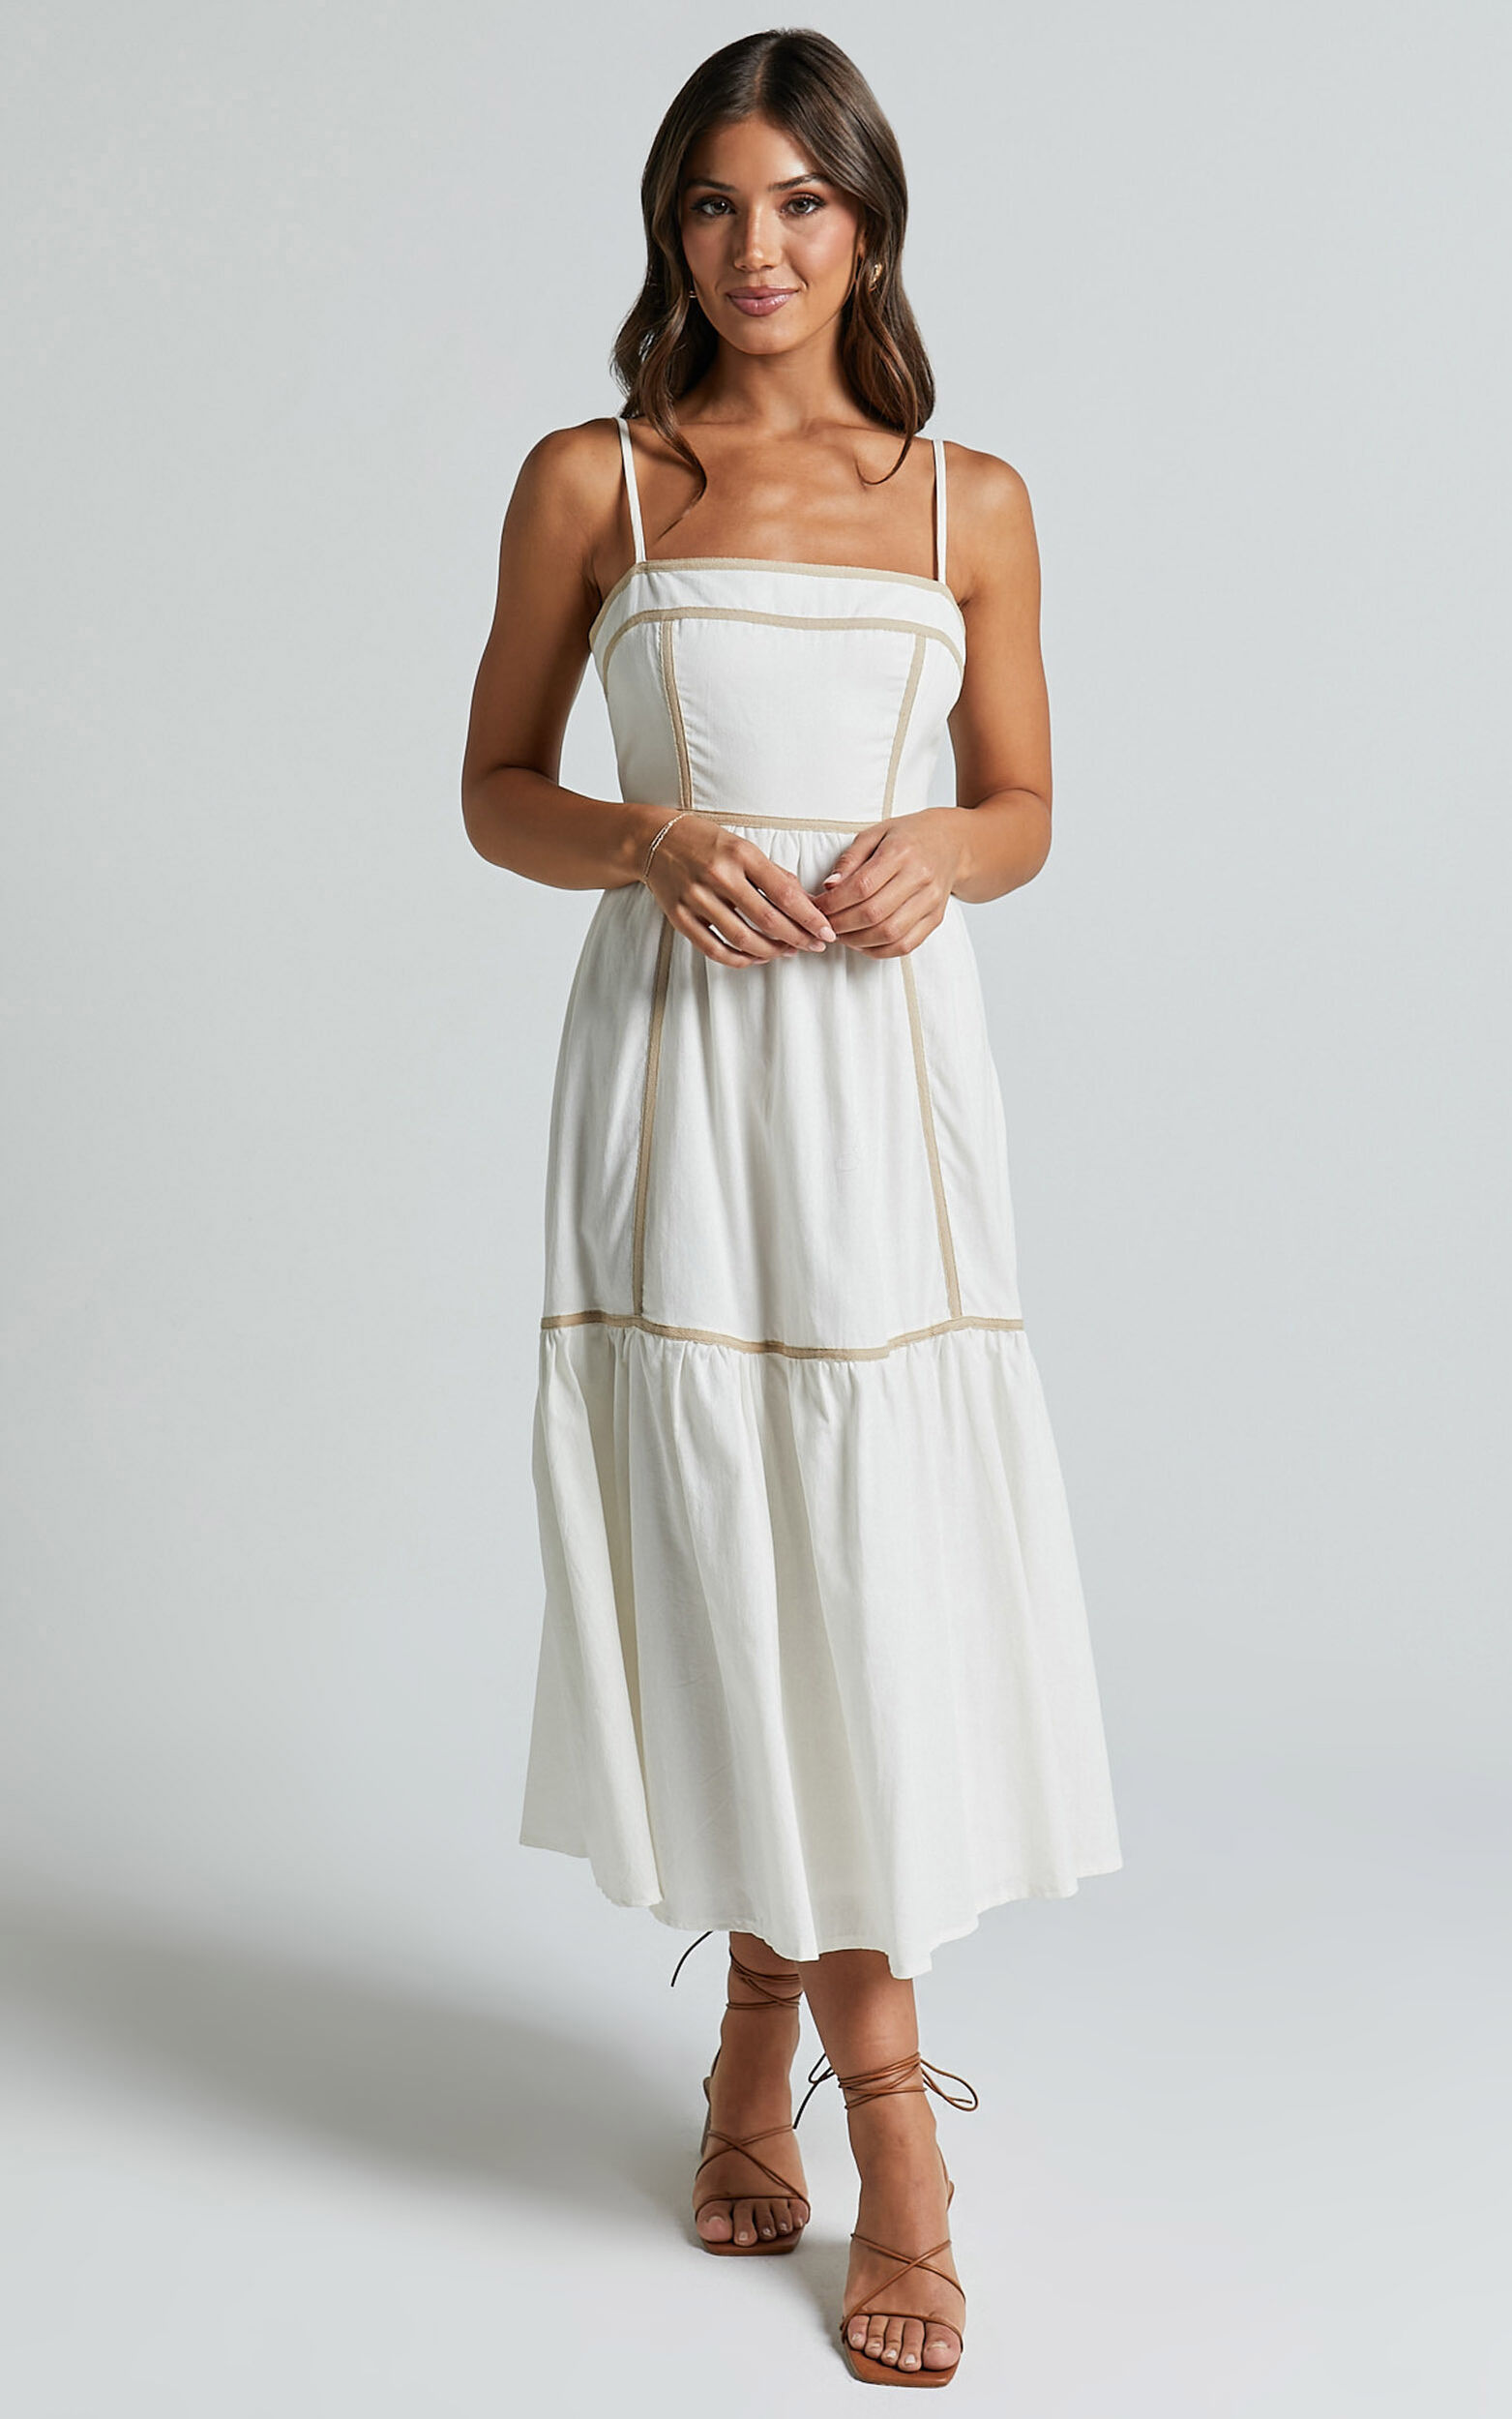 Chanika Midi Dress - Straight Neck Sleeveless Tiered Dress in White with Beige Contrast - 06, WHT1